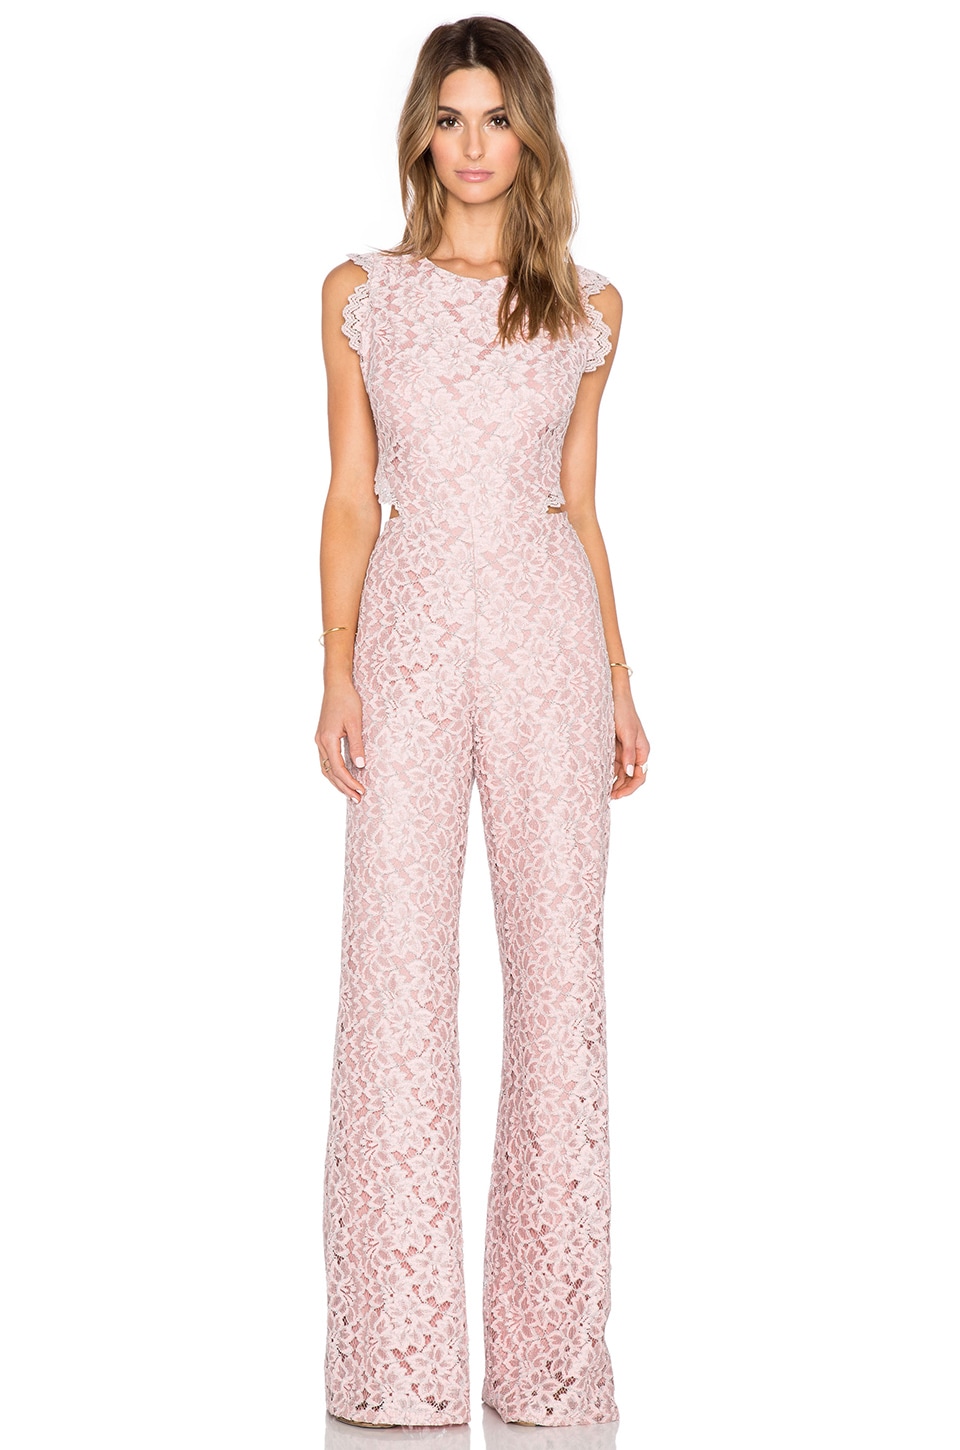 Alexis Livia Lace Jumpsuit In Pink Lace Revolve